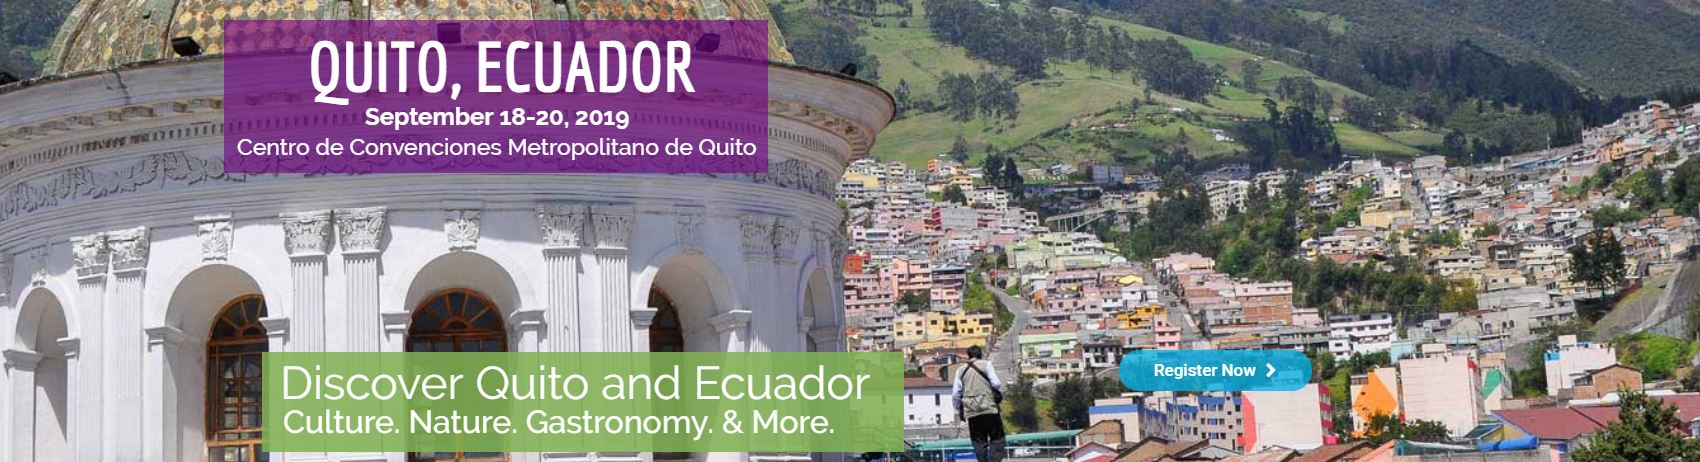 43rd Annual Travel Mart Latin America Gen Global Ecotourism